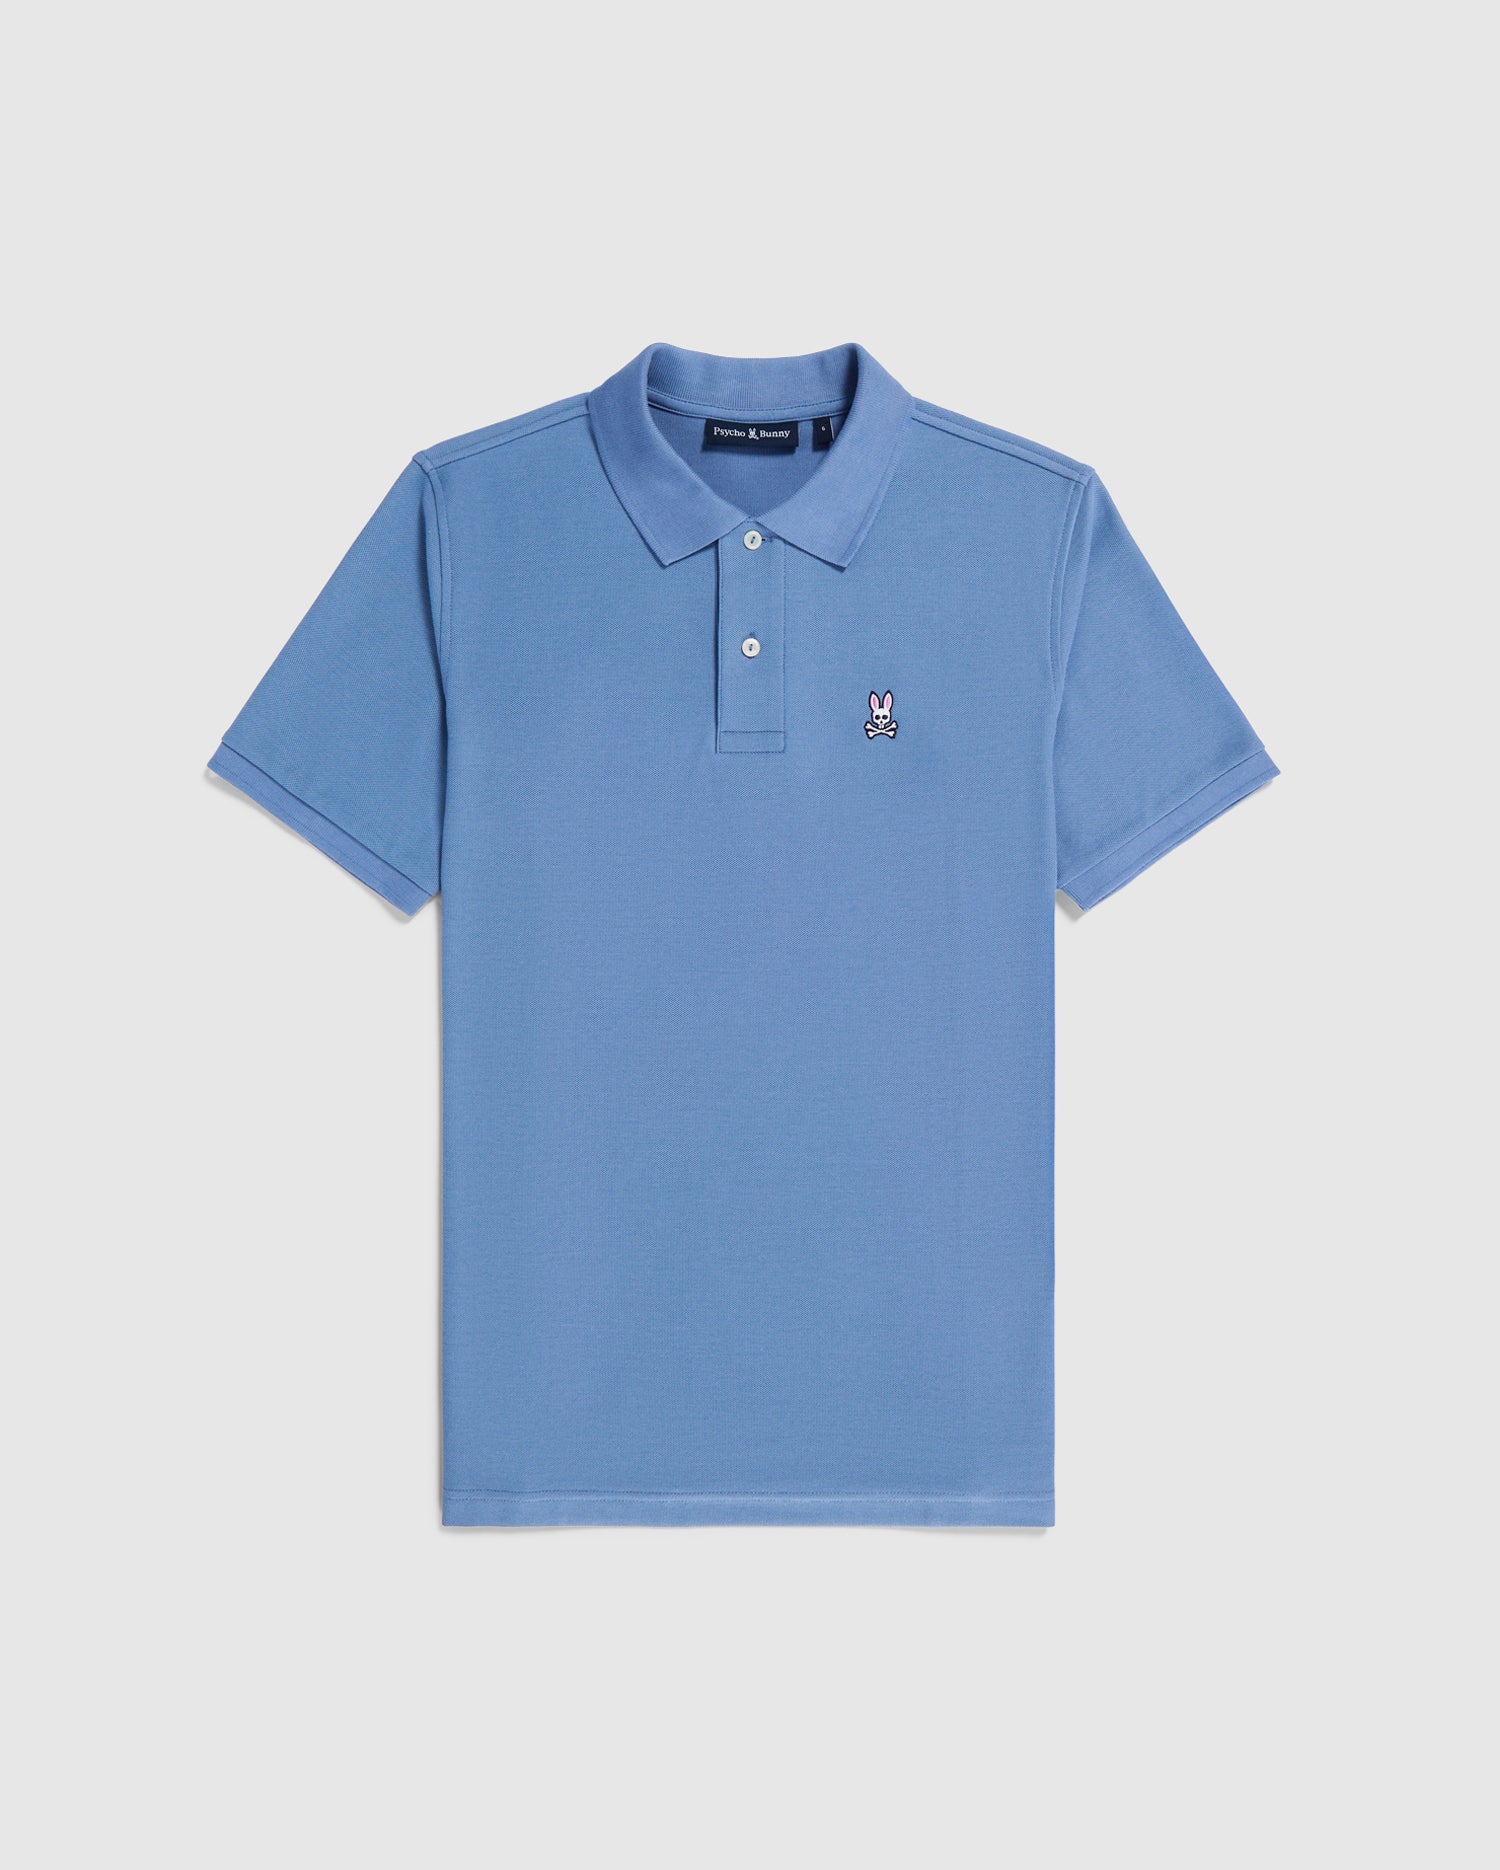 A light blue, short-sleeve men's MENS CLASSIC PIQUE POLO SHIRT - B6K001A2PC with a collar and buttoned placket. Crafted from premium Pima cotton, it features a small embroidered bunny logo on the left chest area. The regular fit shirt from Psycho Bunny is neatly laid out on a plain white background.